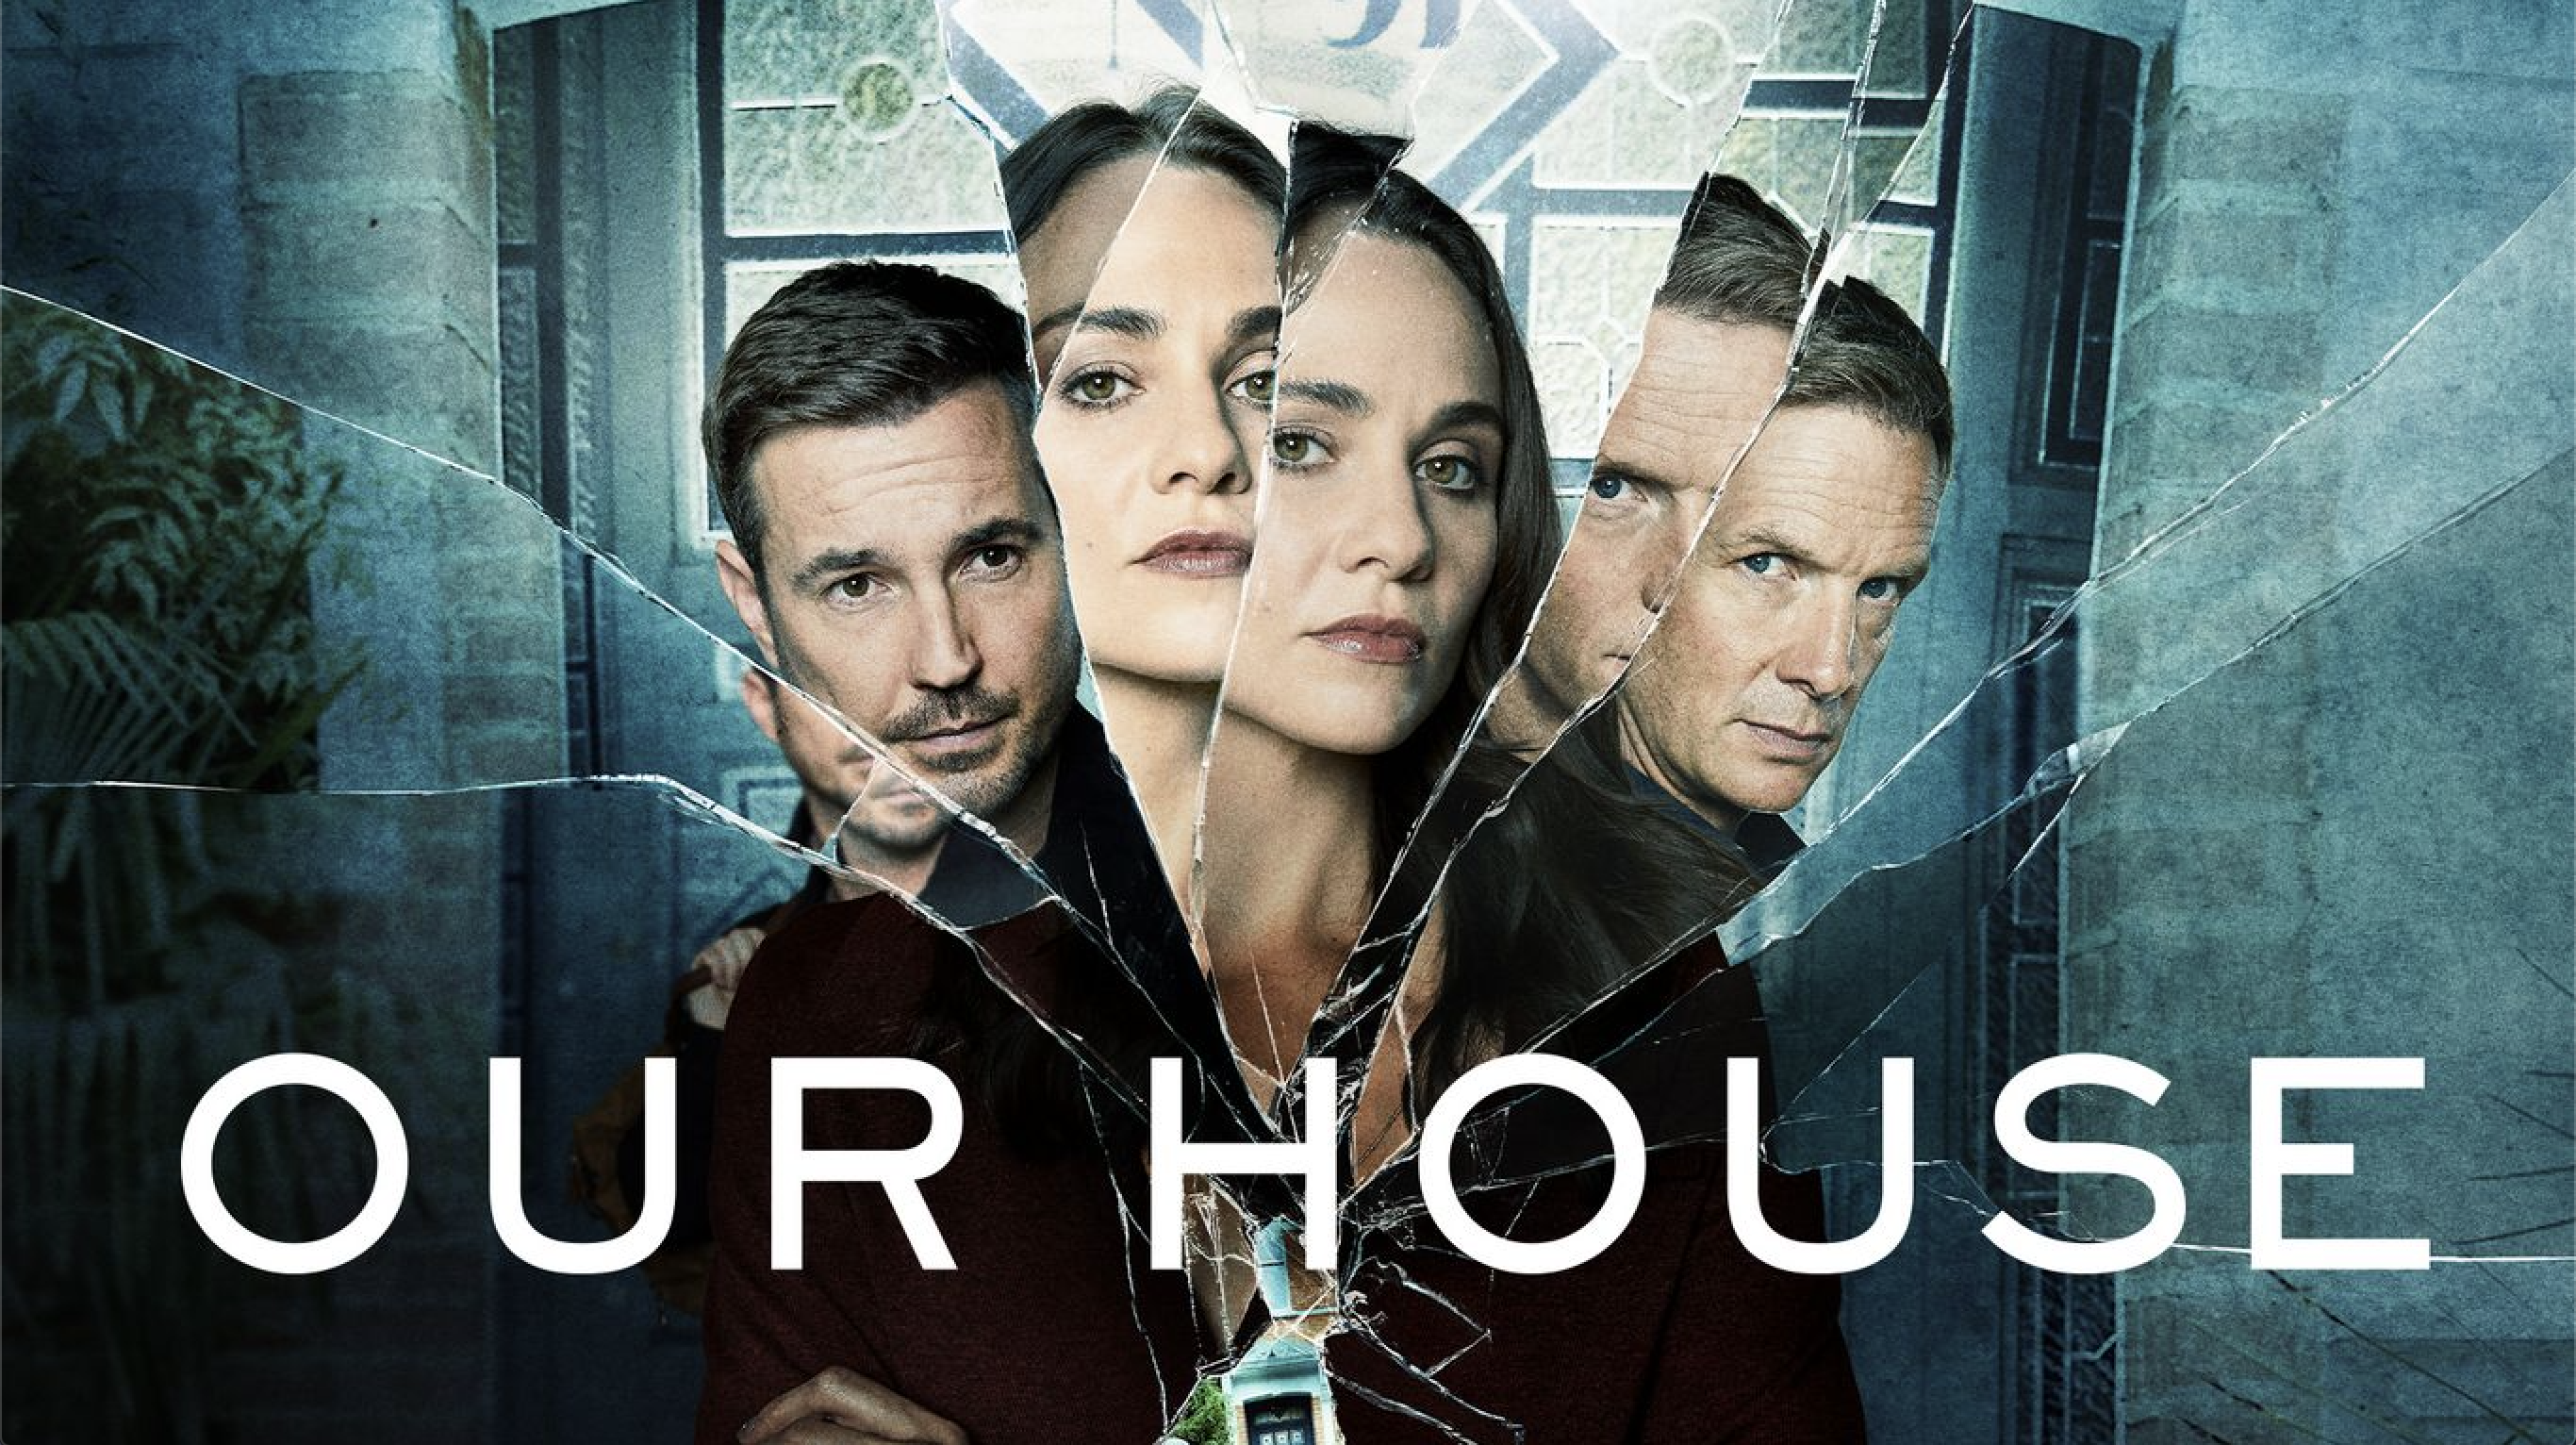 ‘Our House’ with Celinde Schoenmaker